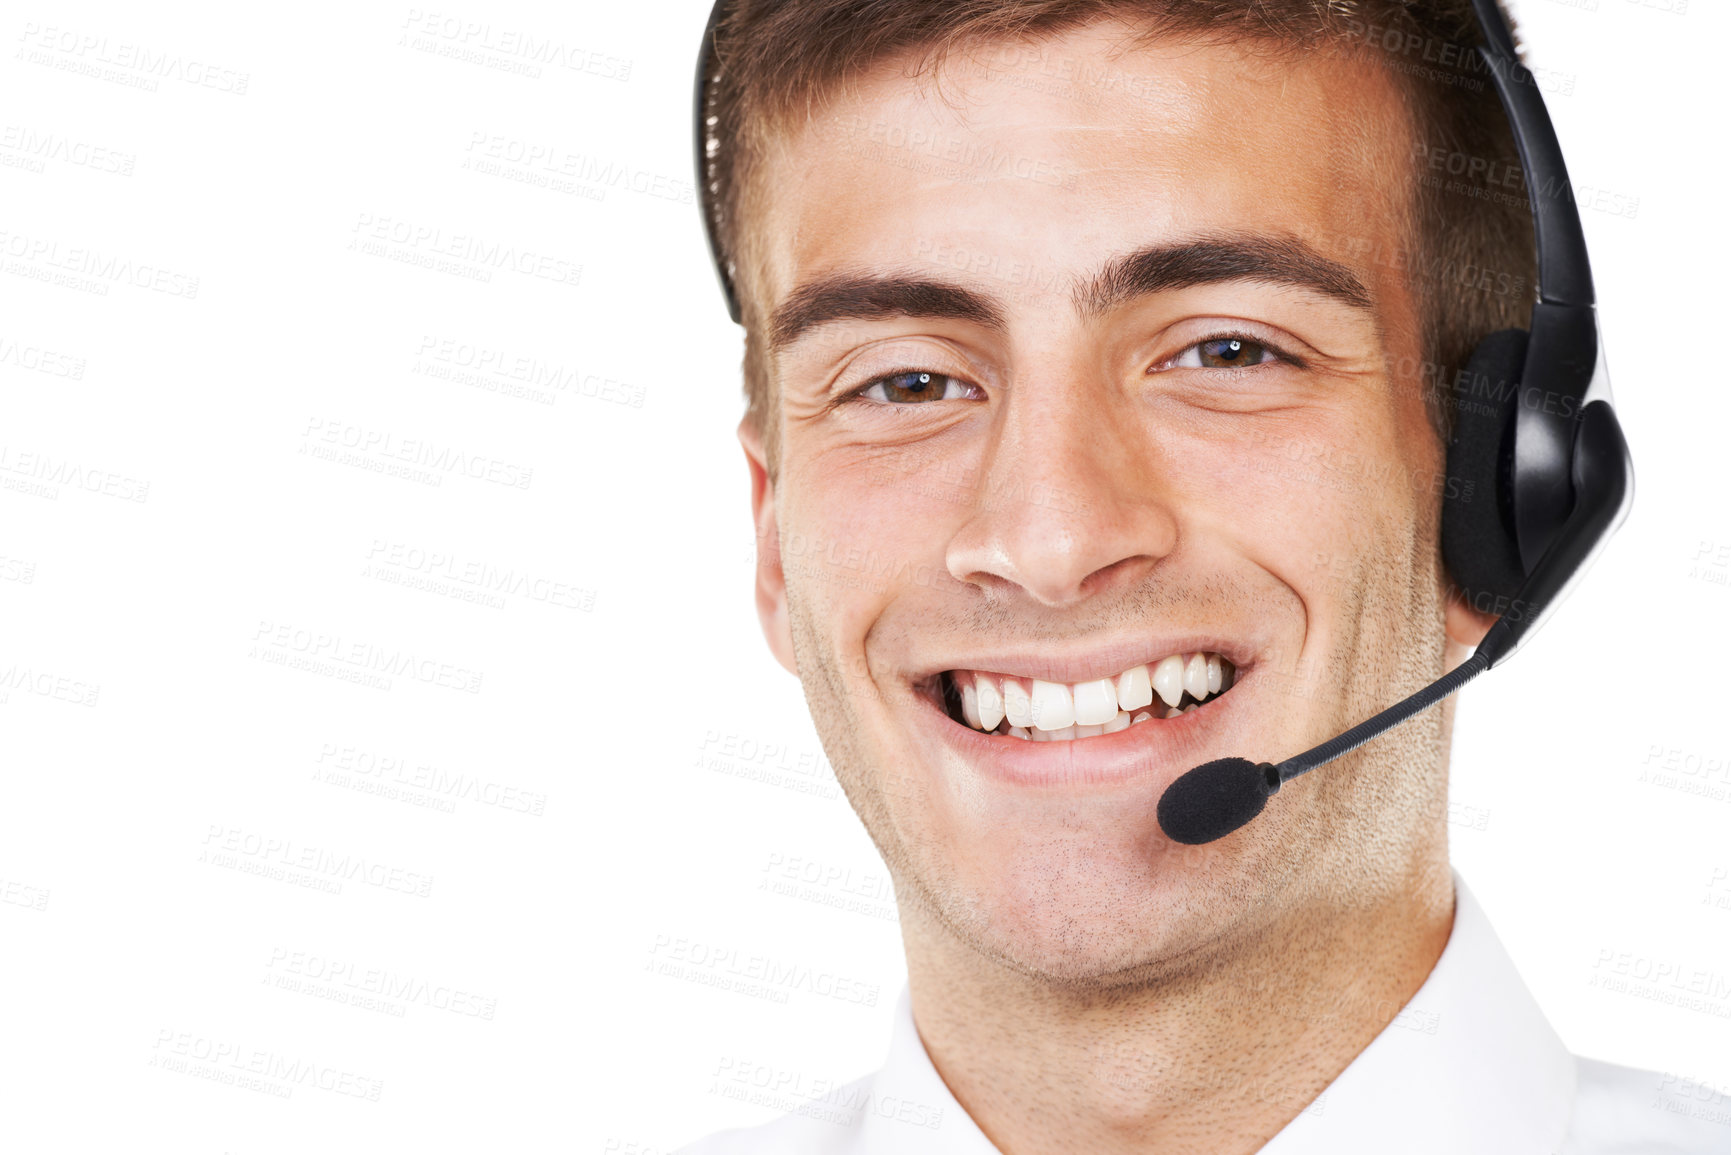 Buy stock photo Call center, happy portrait and man with space for customer service, CRM questions and mockup in studio on white background. Face of telemarketing salesman consulting with microphone for IT advisory 